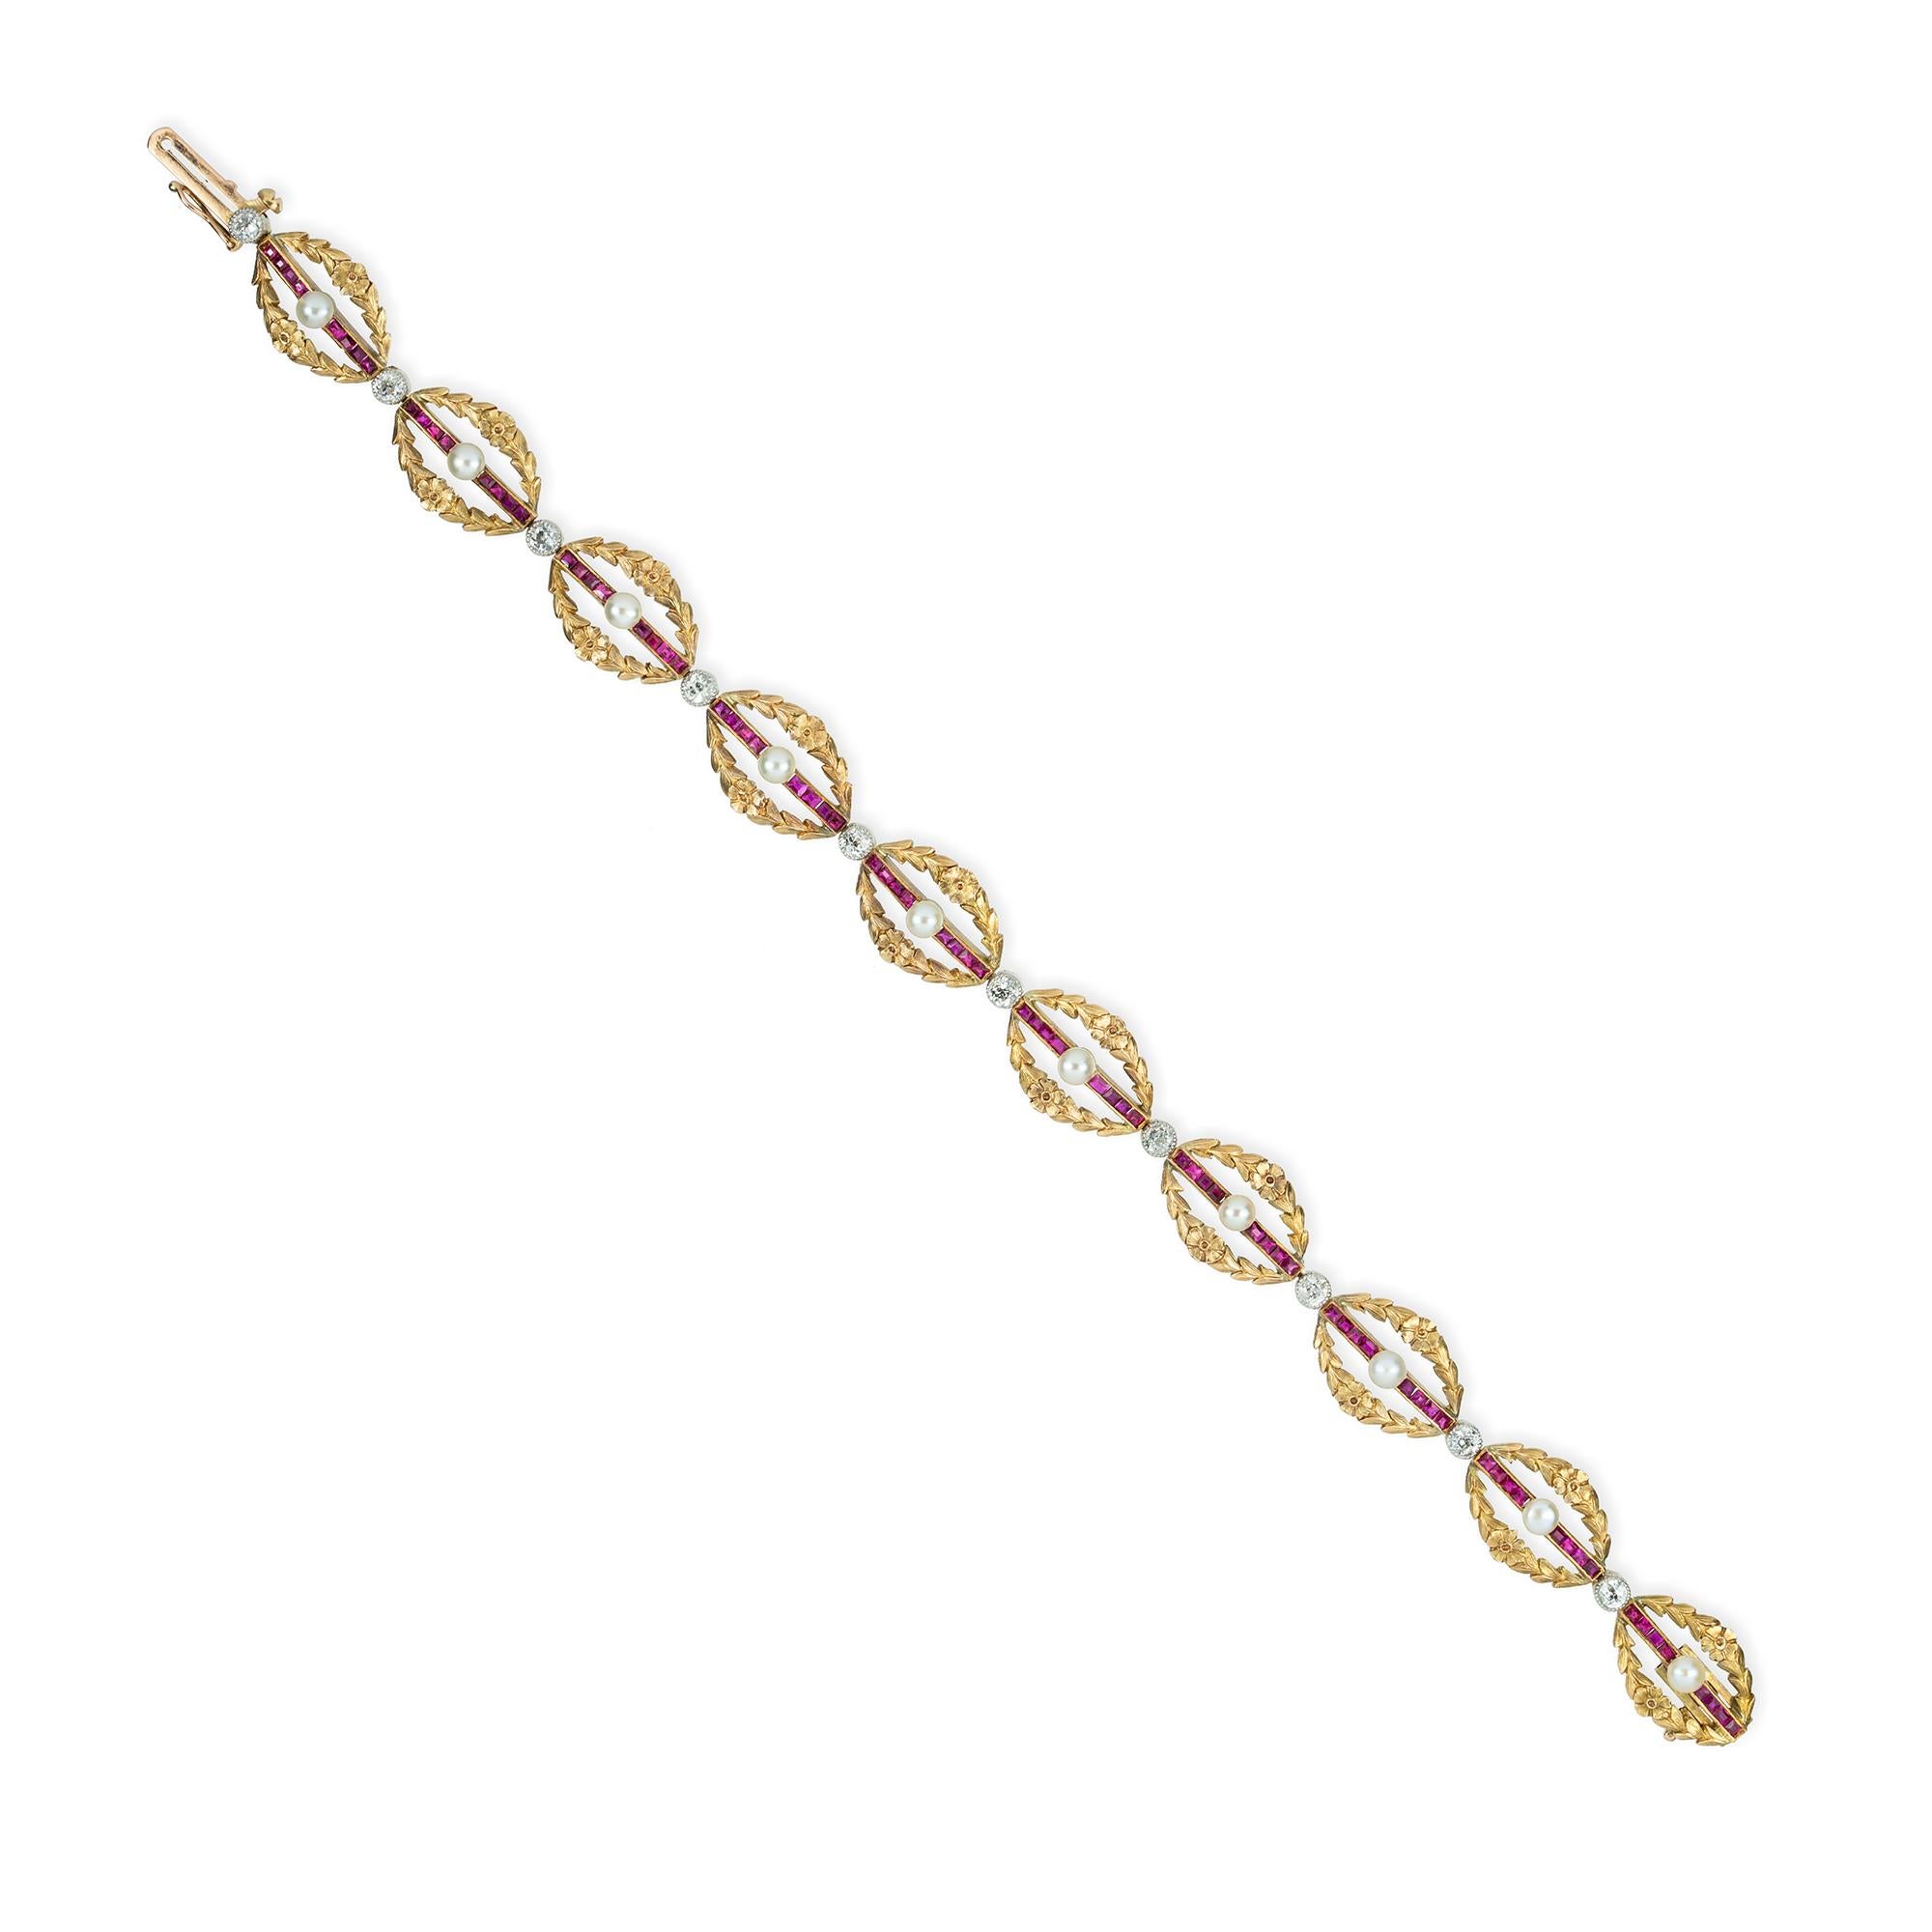 A Belle Époque ruby, diamond and pearl bracelet, consisting of ten links each with a calibre-cut ruby set bar centrally set with a pearl, to openwork floral garland decorations, with single old-cut diamond-set collects, total diamond weight